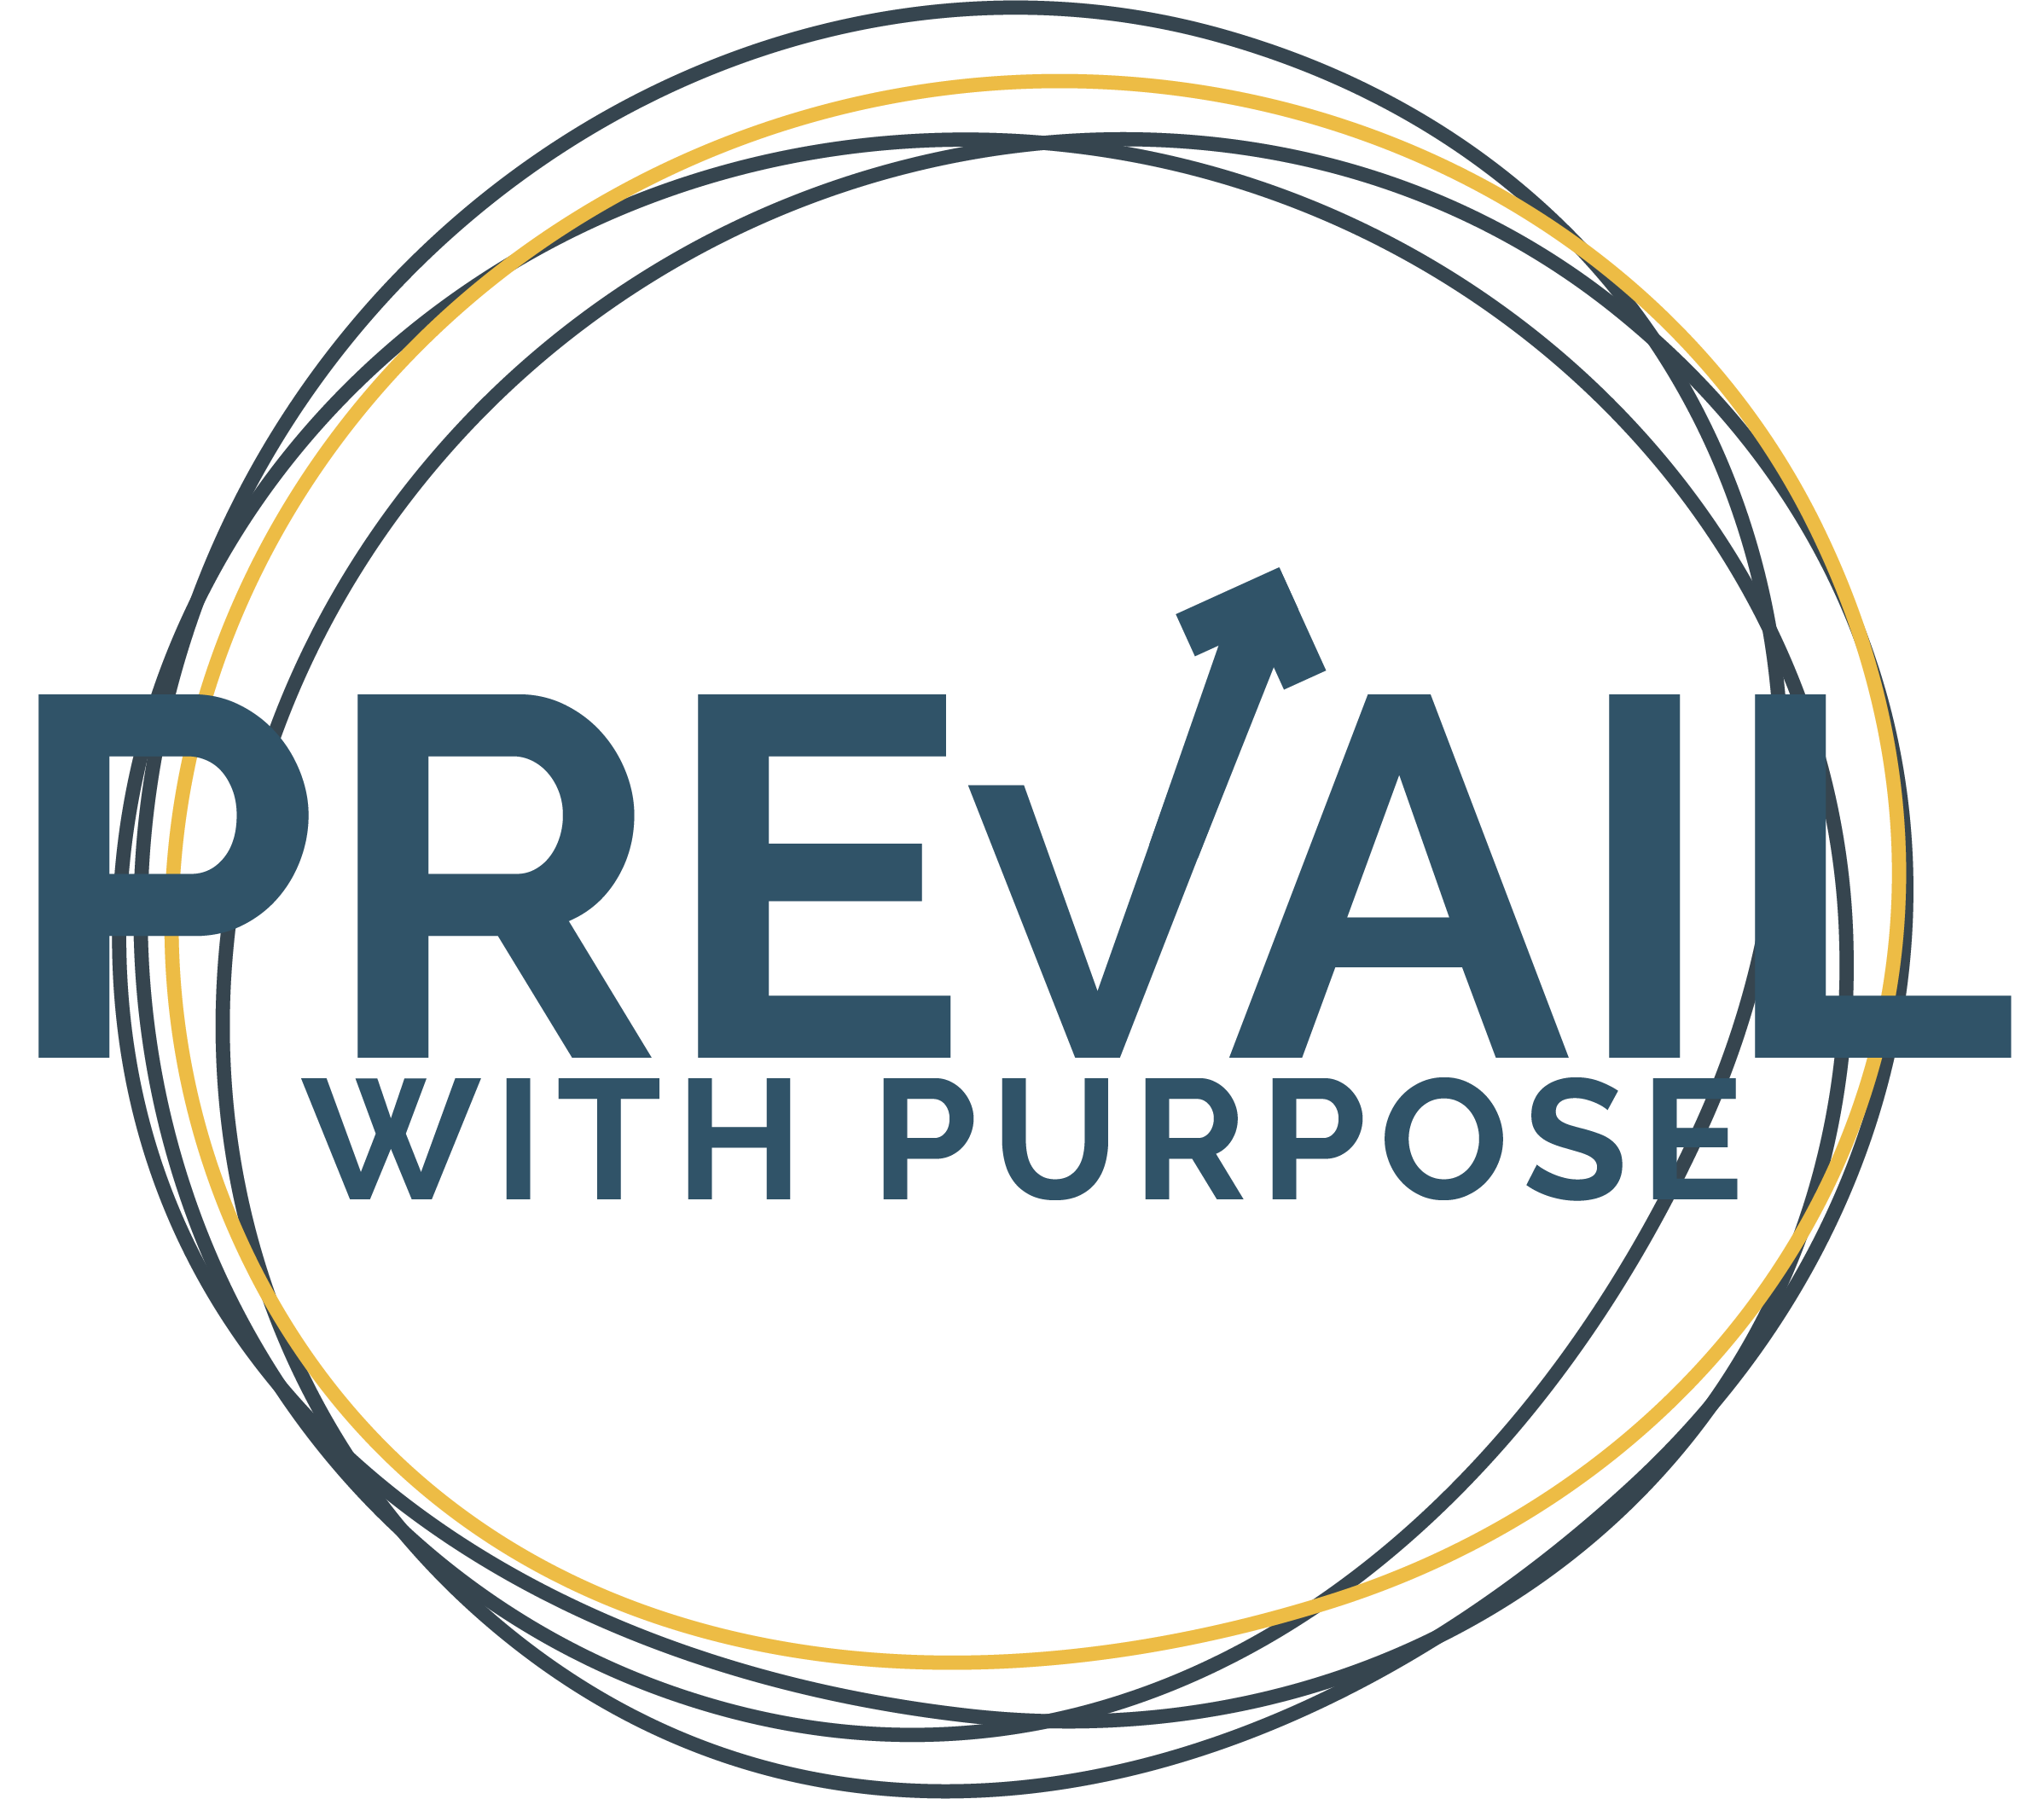 PREVAIL WITH PURPOSE online course logo